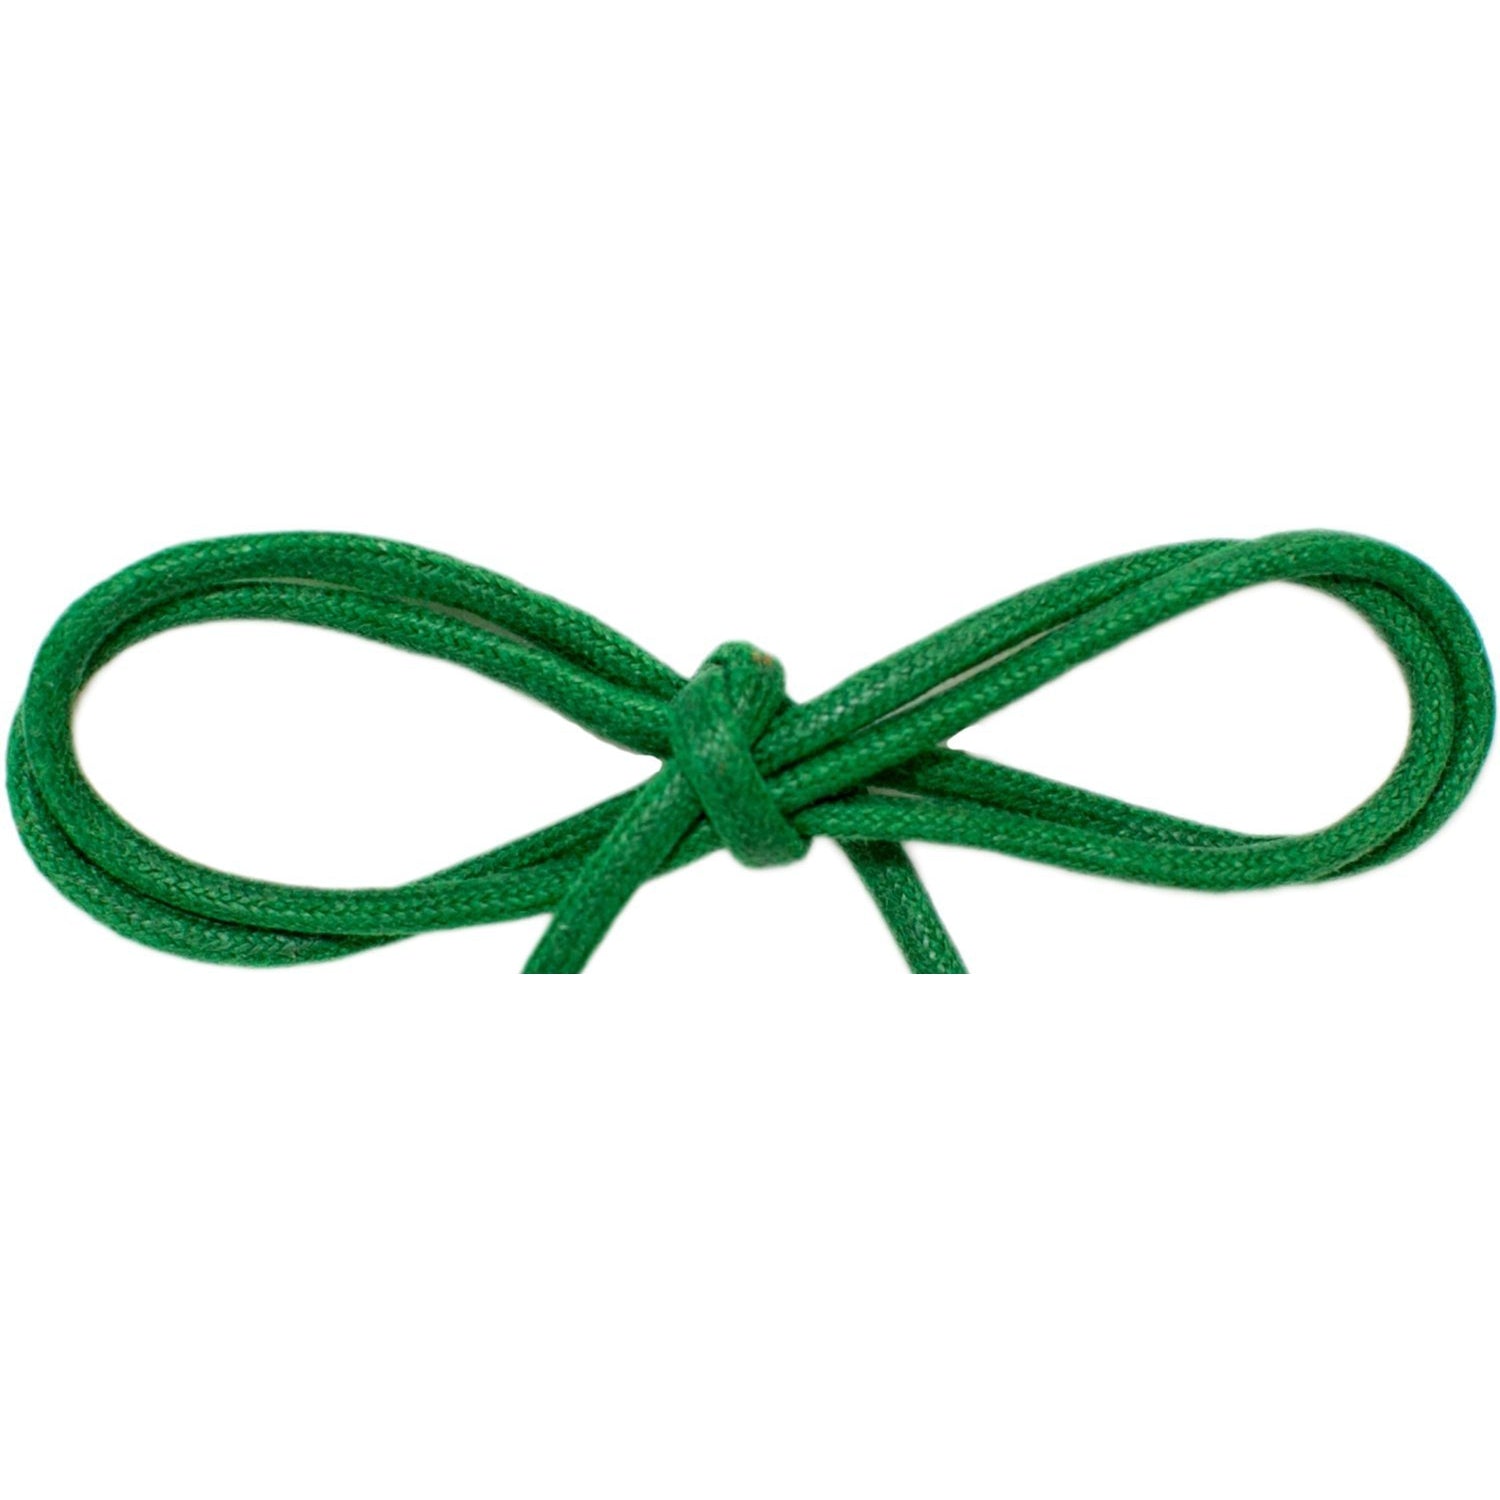 Wholesale Waxed Cotton Thin Round DRESS Laces 1/8'' - Kelly Green (12 Pair Pack) Shoelaces